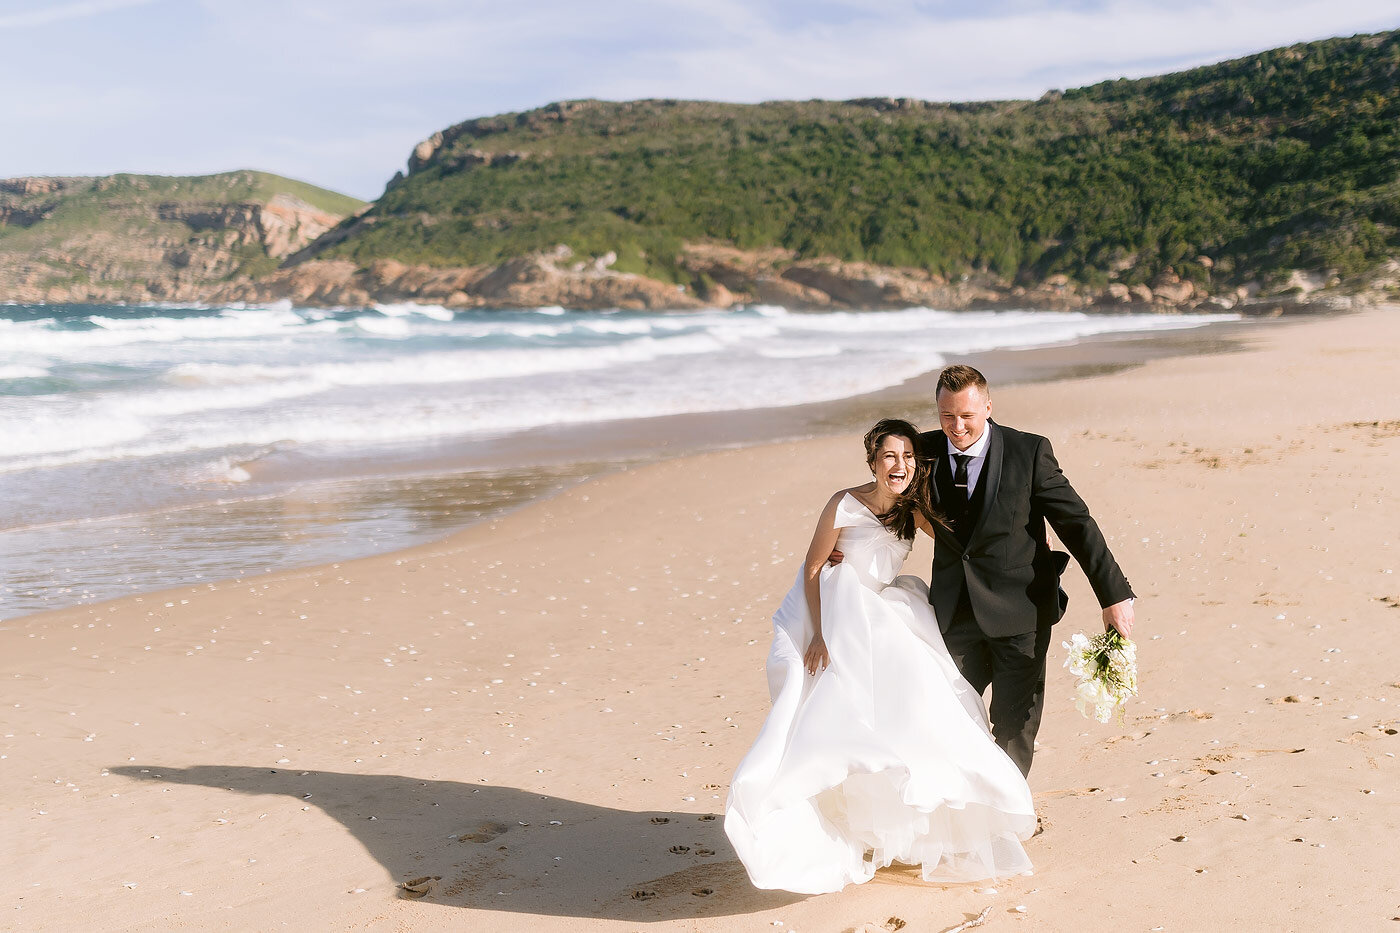 Wedding Couple portraits on the beach with Robberg in the backround.